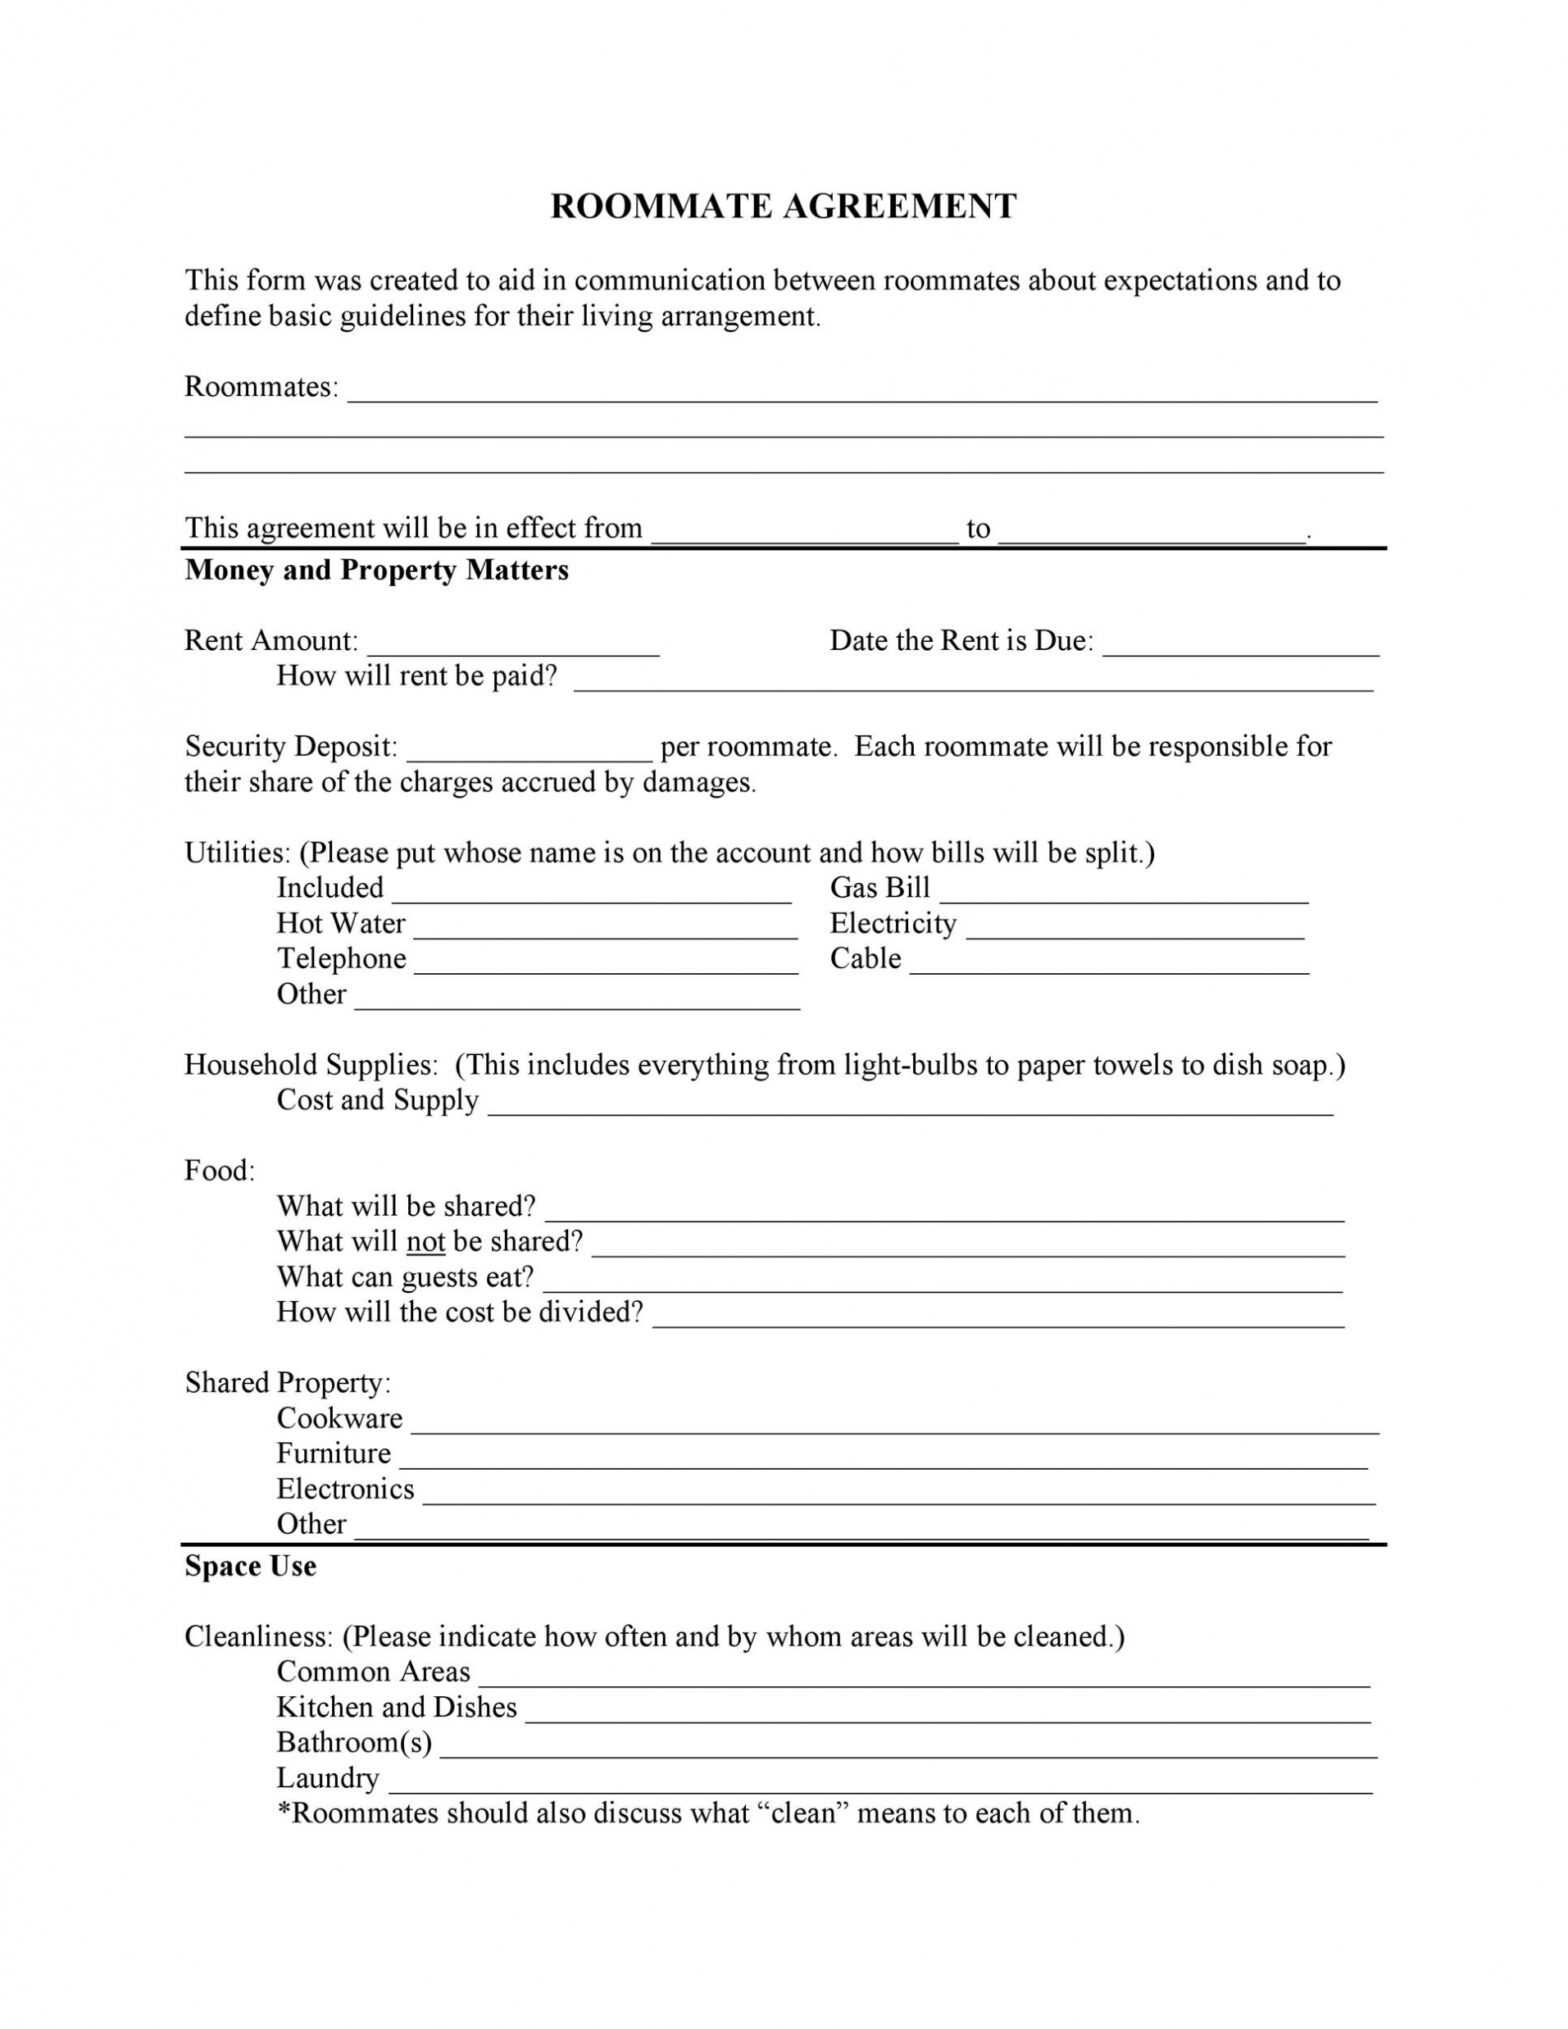 40+ Free Roommate Agreement Templates &amp; Forms (Word, Pdf) with House And Flat Share Agreement Contract Template